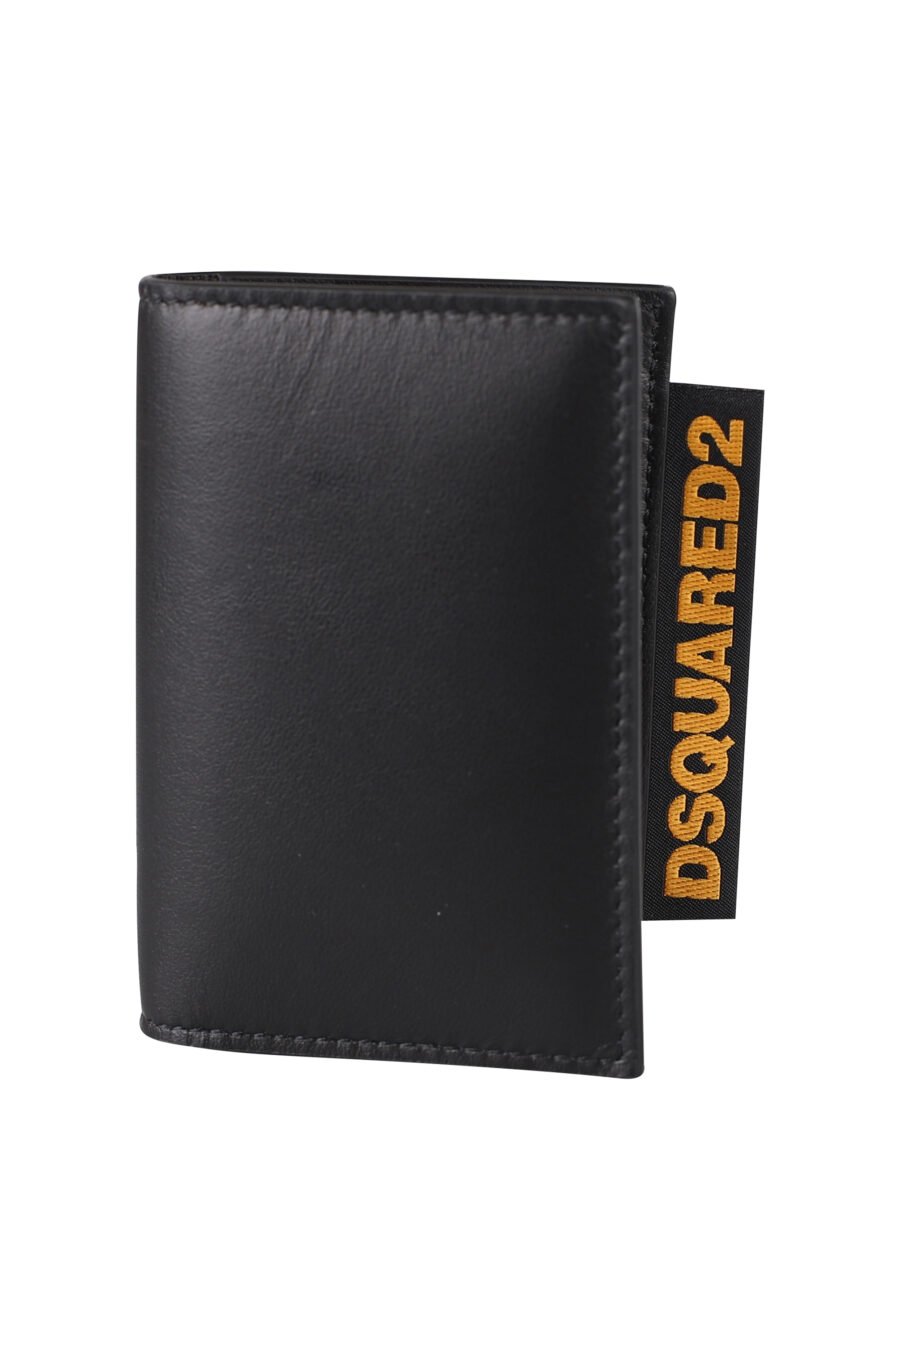 Black card holder with yellow label and logo - IMG 1284